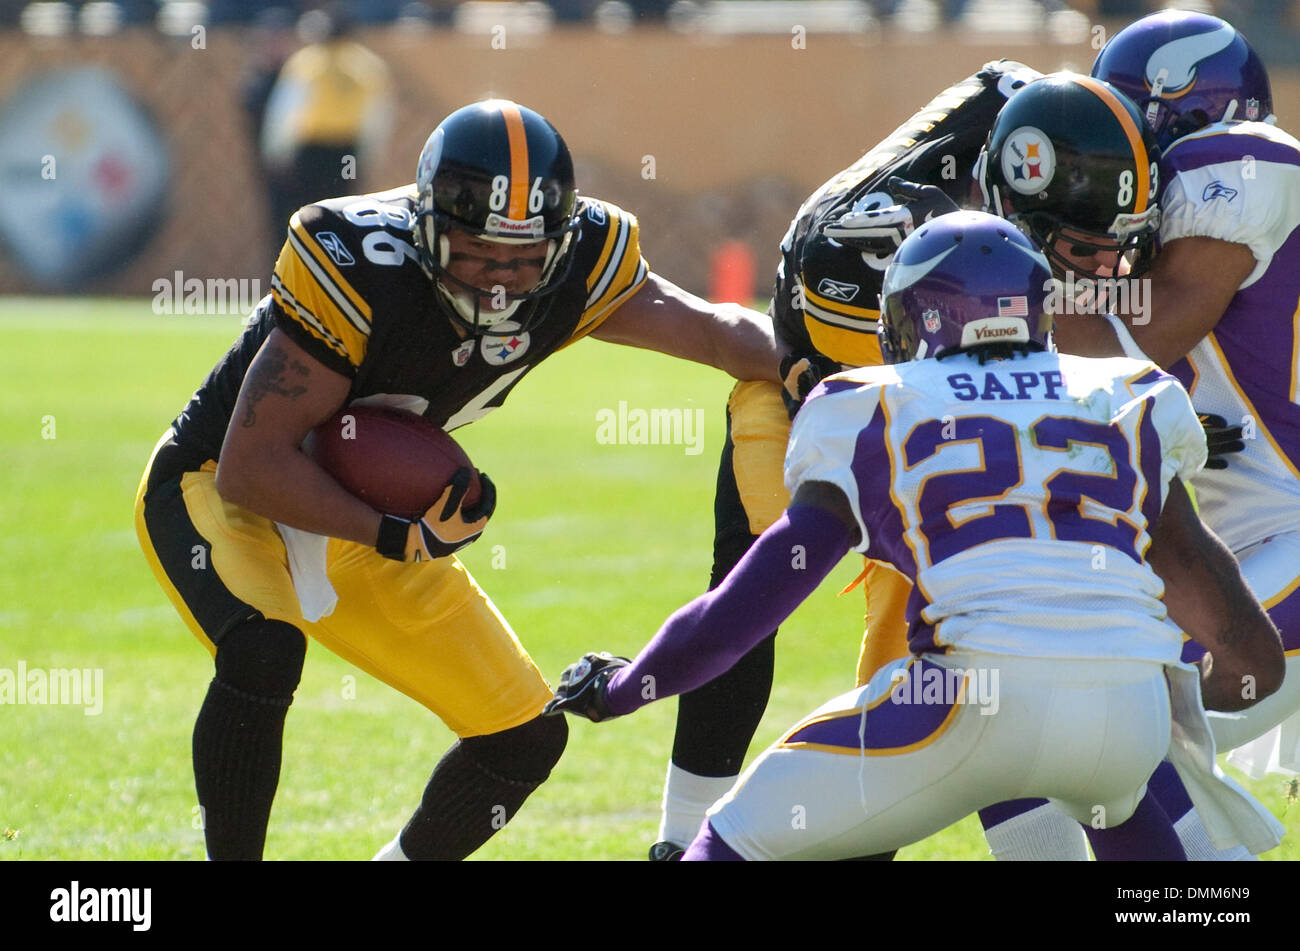 25 October 2009: Pittsburgh Steelers wide receiver Hines Ward (86) tries to avoid a tackle by Minnesota Vikings defensive back Benny Sapp during a game at Heinz field in Pittsburgh PA. Pittsburgh won the game 27-17.  Mandatory Credit: Mark Konezny / Southcreek Global. (Credit Image: © Southcreek Global/ZUMApress.com) Stock Photo